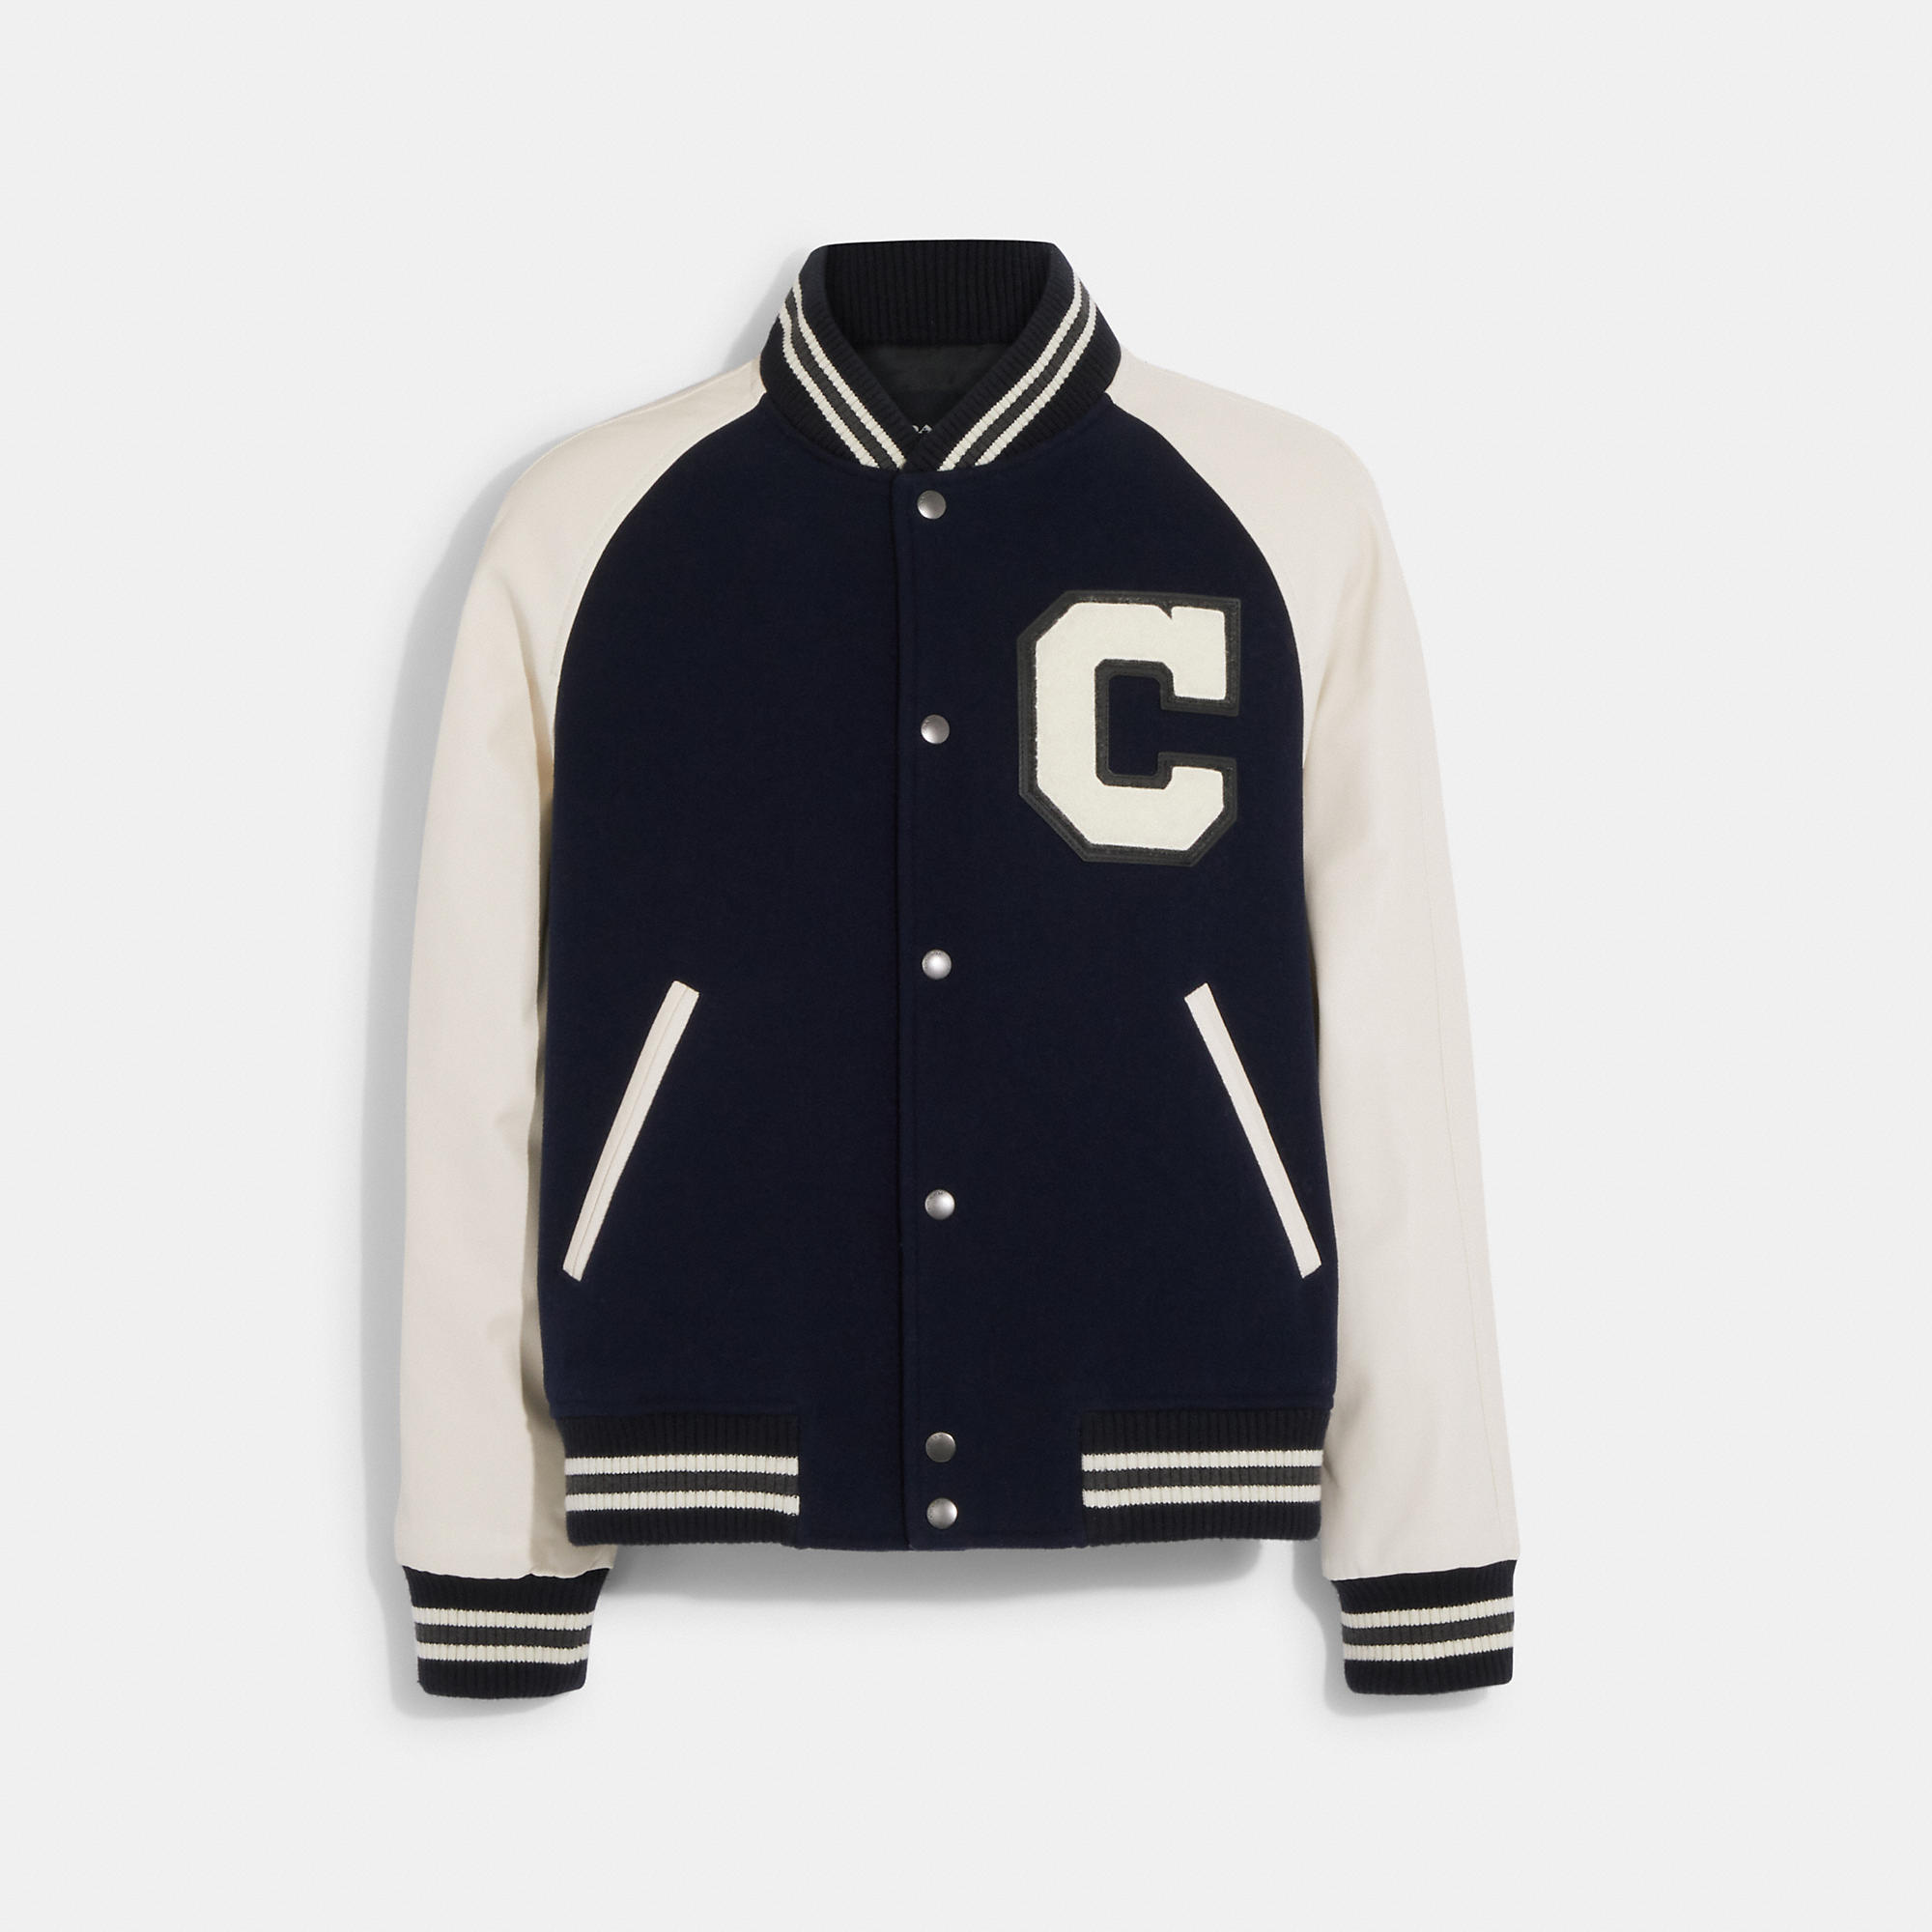 Shop Coach Outlet's Varsity Collection With Prices Starting at $28